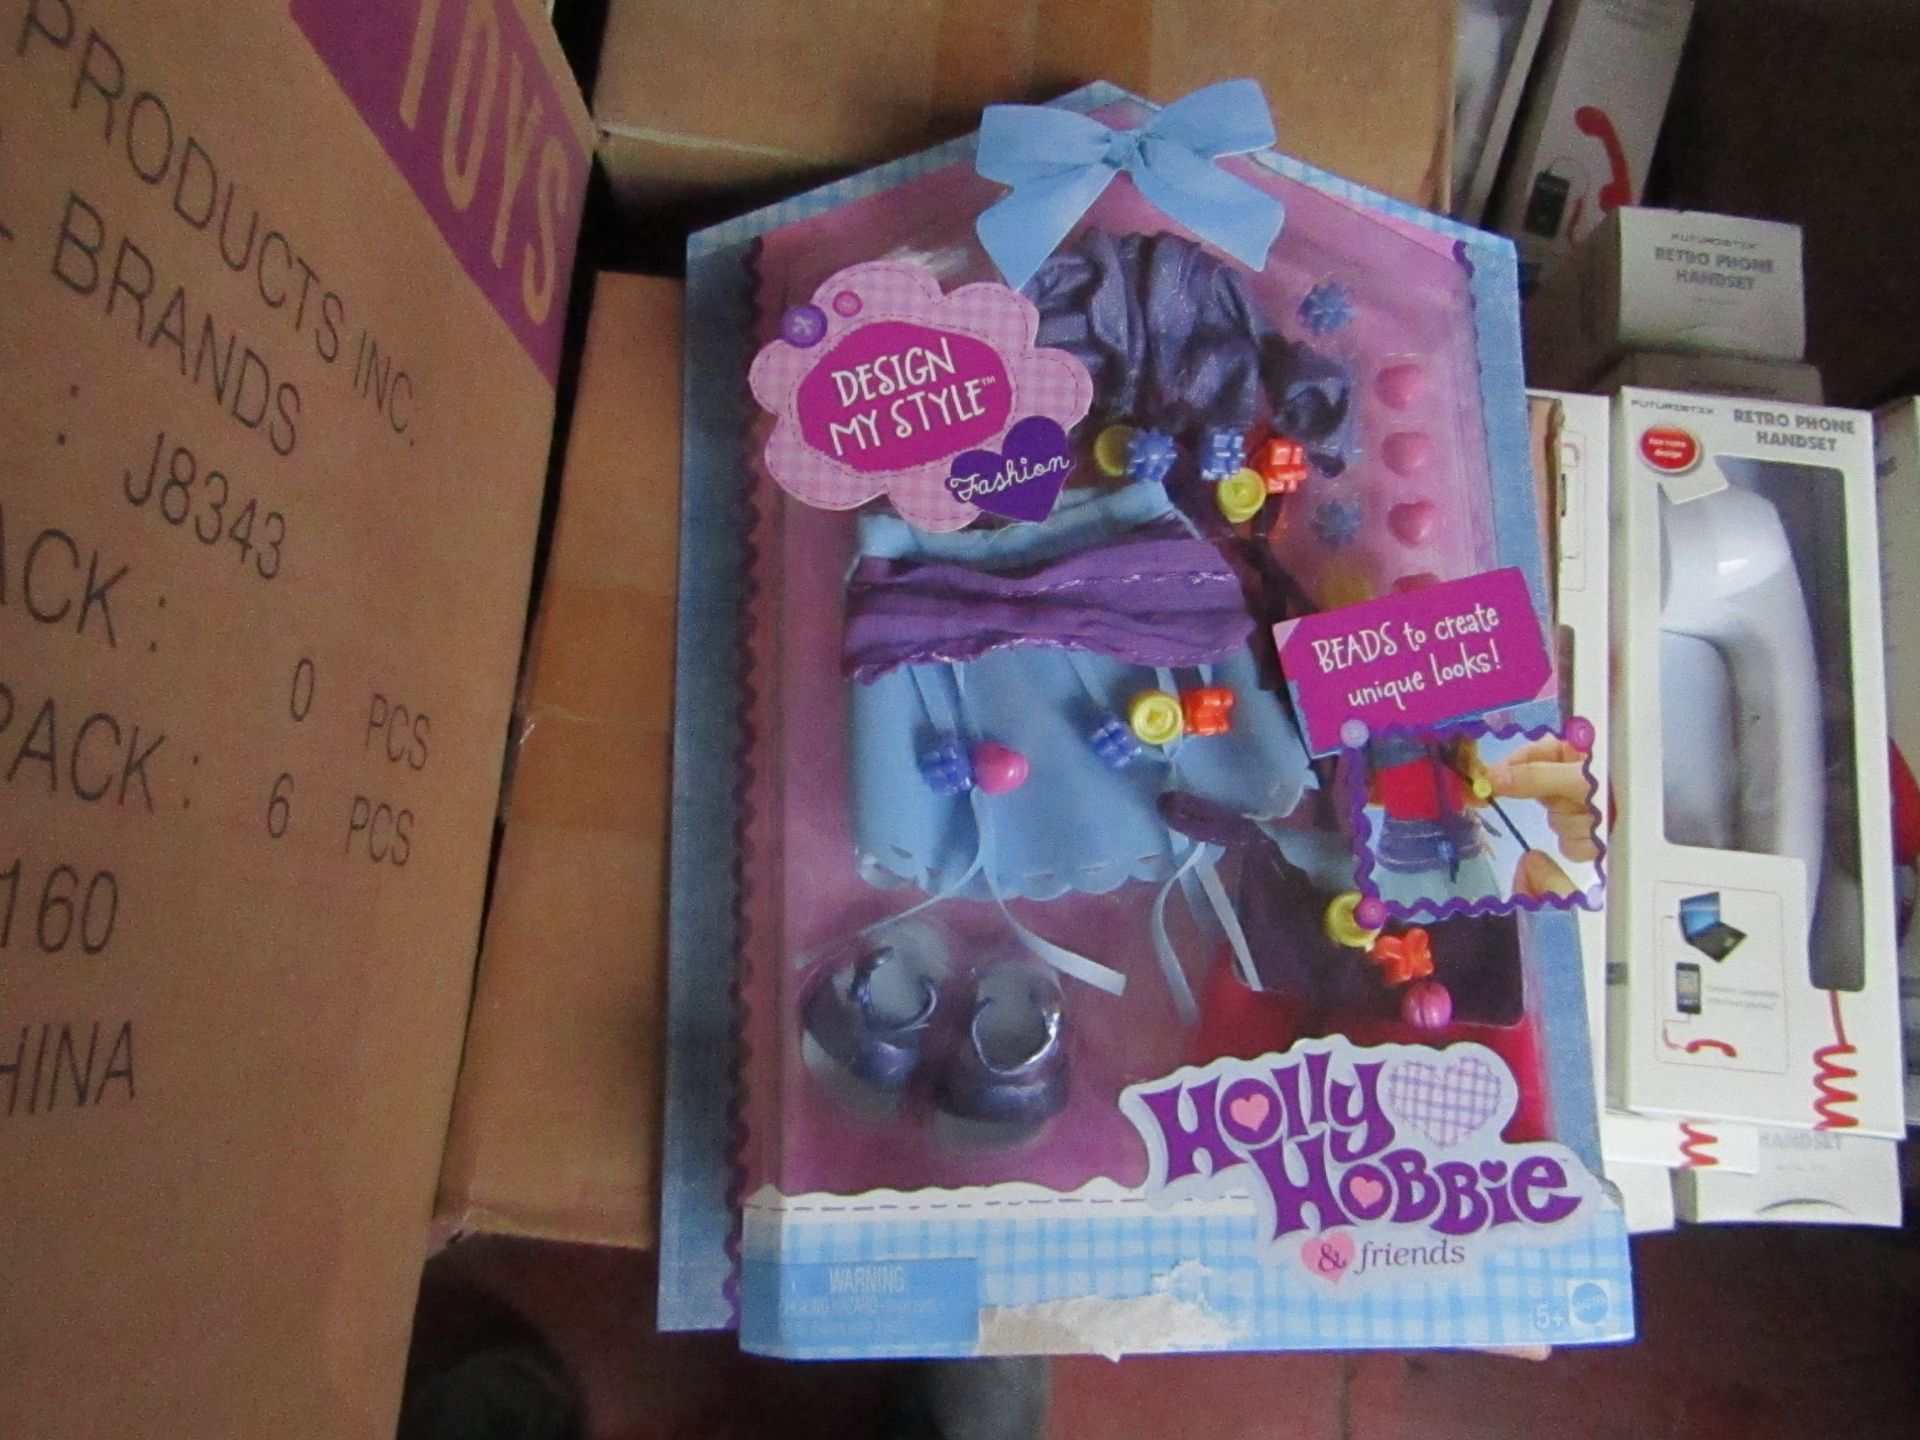 6x Holly Hobbie doll set, all new and packaged.